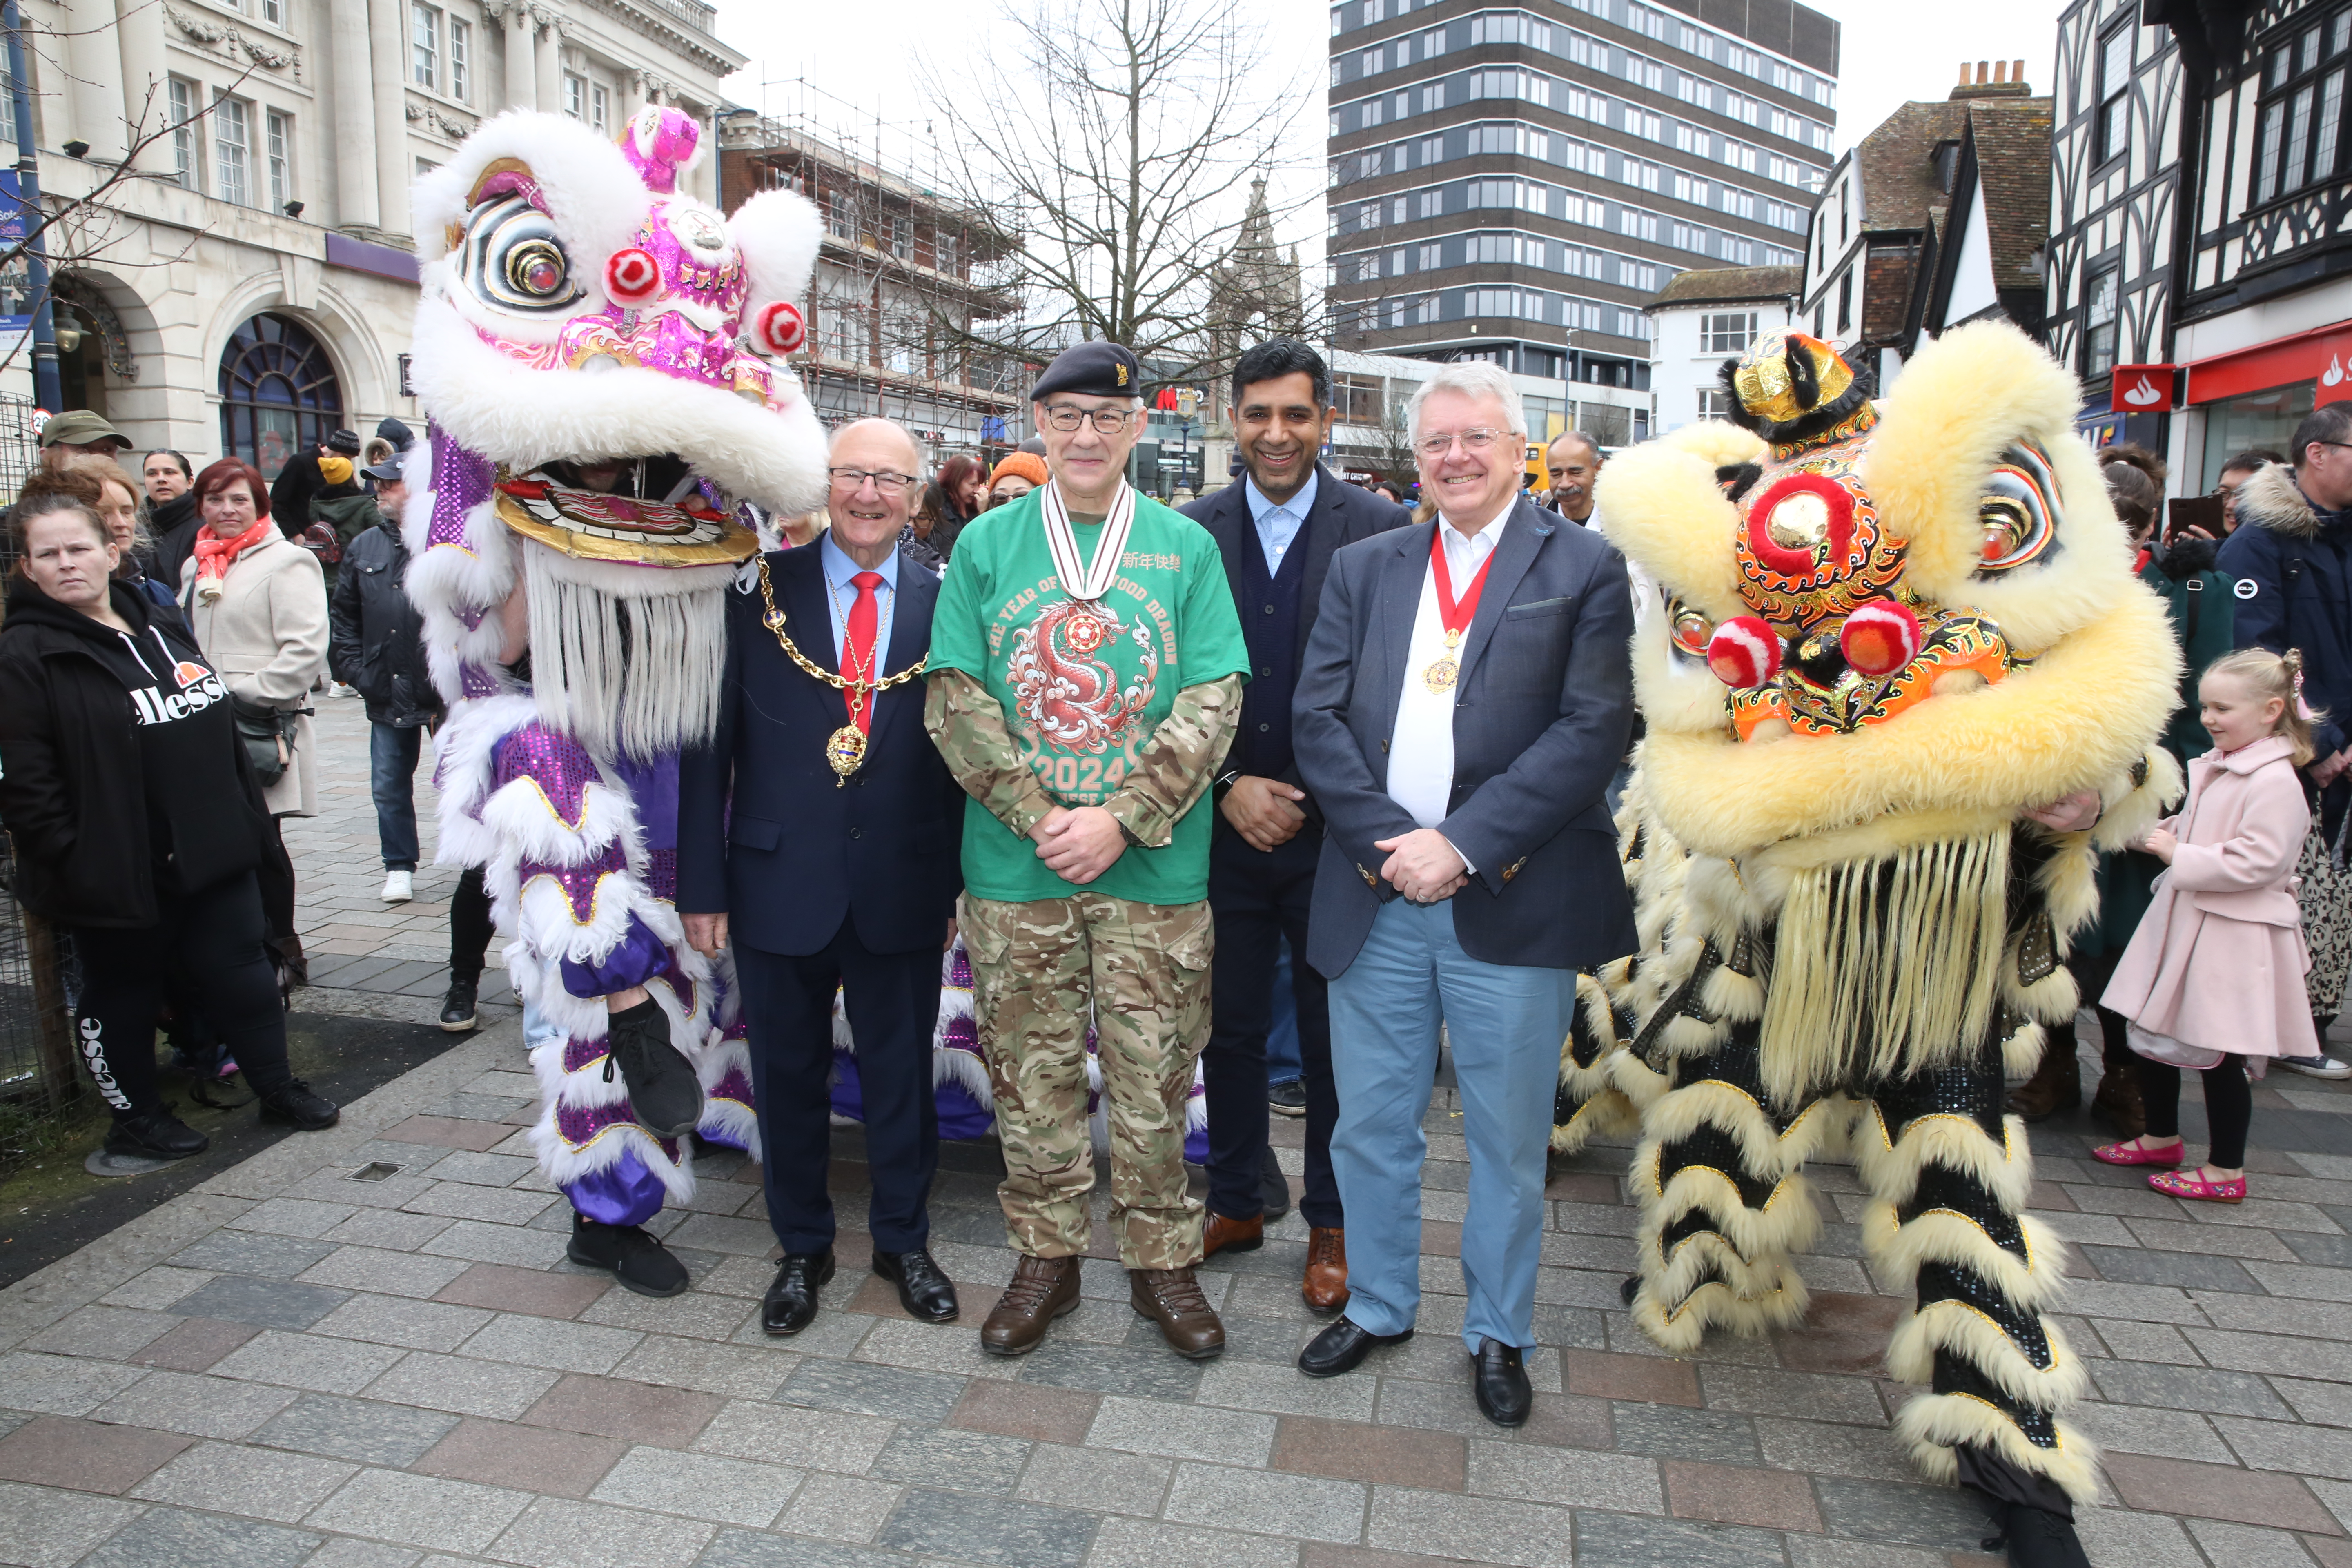 People of Maidstone celebrate Lunar New Year image